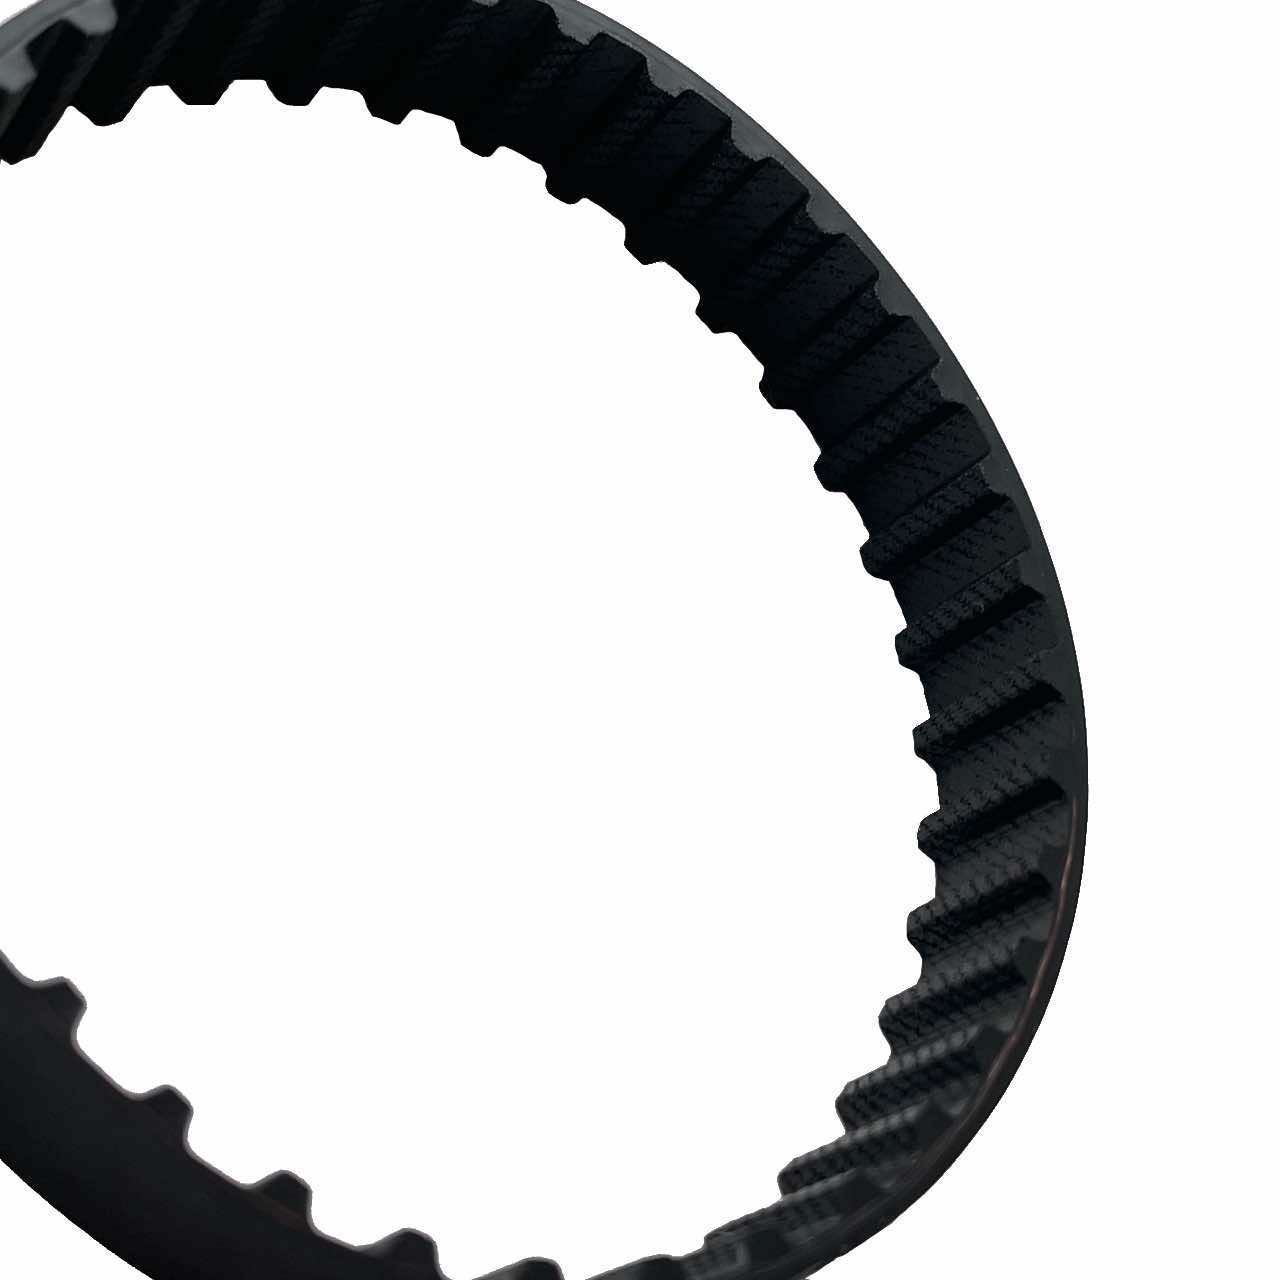 https://cdn11.bigcommerce.com/s-ft0ub2irt4/images/stencil/1280x1280/products/858/6319/Drive_Belt_For_Black_And_Decker_DN712_2__15702.1634379662.jpg?c=1?imbypass=on